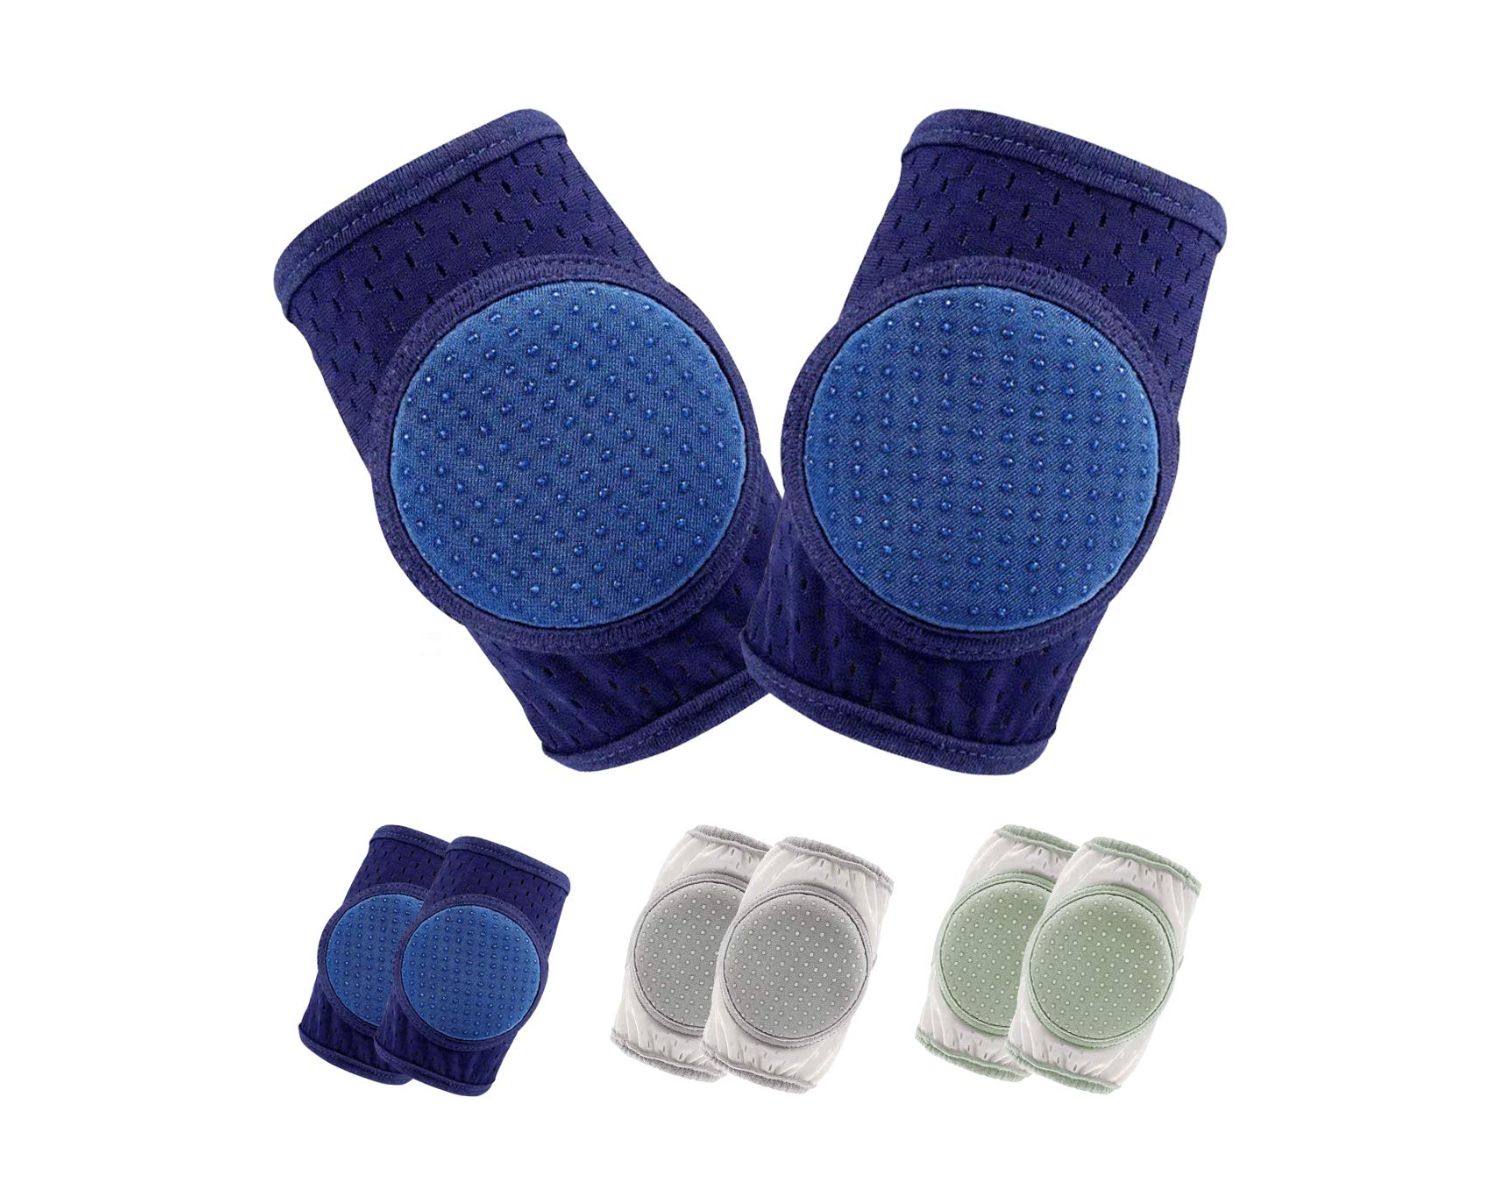 Review: Best Baby Knee Pads for Safe Crawling